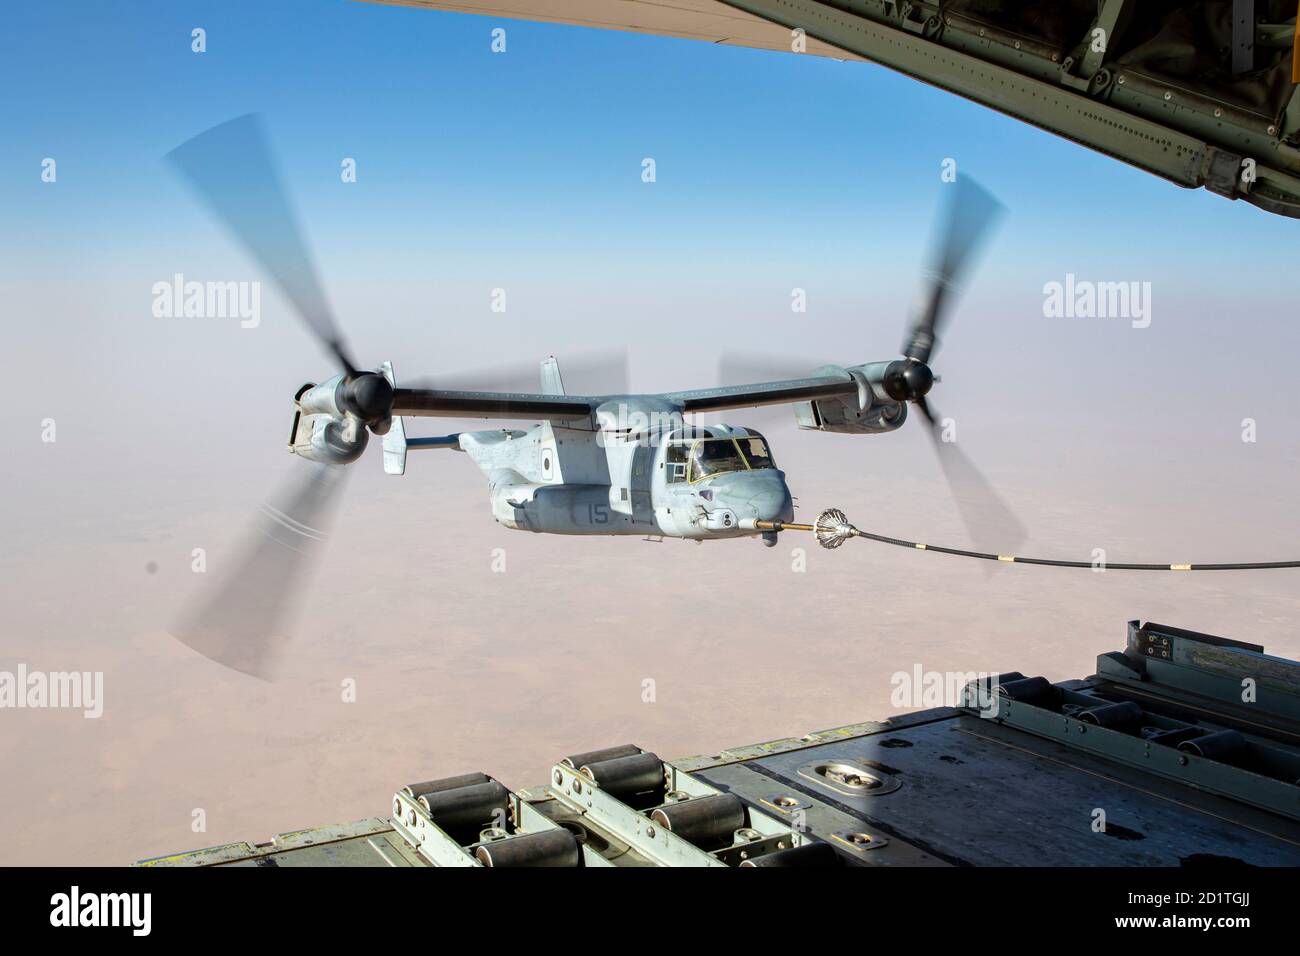 A U.S. Marine Corps MV-22 Osprey with Marine Medium Tiltrotor Squadron 166, Special Purpose Marine Air-Ground Task Force – Crisis Response – Central Command, receives fuel from a U.S. Marine Corps KC-130 during an air-to-air refueling (AAR) mission over the U.S. Central Command Area of Responsibility on Oct. 3, 2020. The purpose of an AAR mission is to transfer aviation fuel from one aircraft to another in order to extend the range, payload capacity, and endurance of the receiving aircraft. The SPMAGTF-CR-CC is a crisis response force, prepared to deploy a variety of capabilities across the re Stock Photo